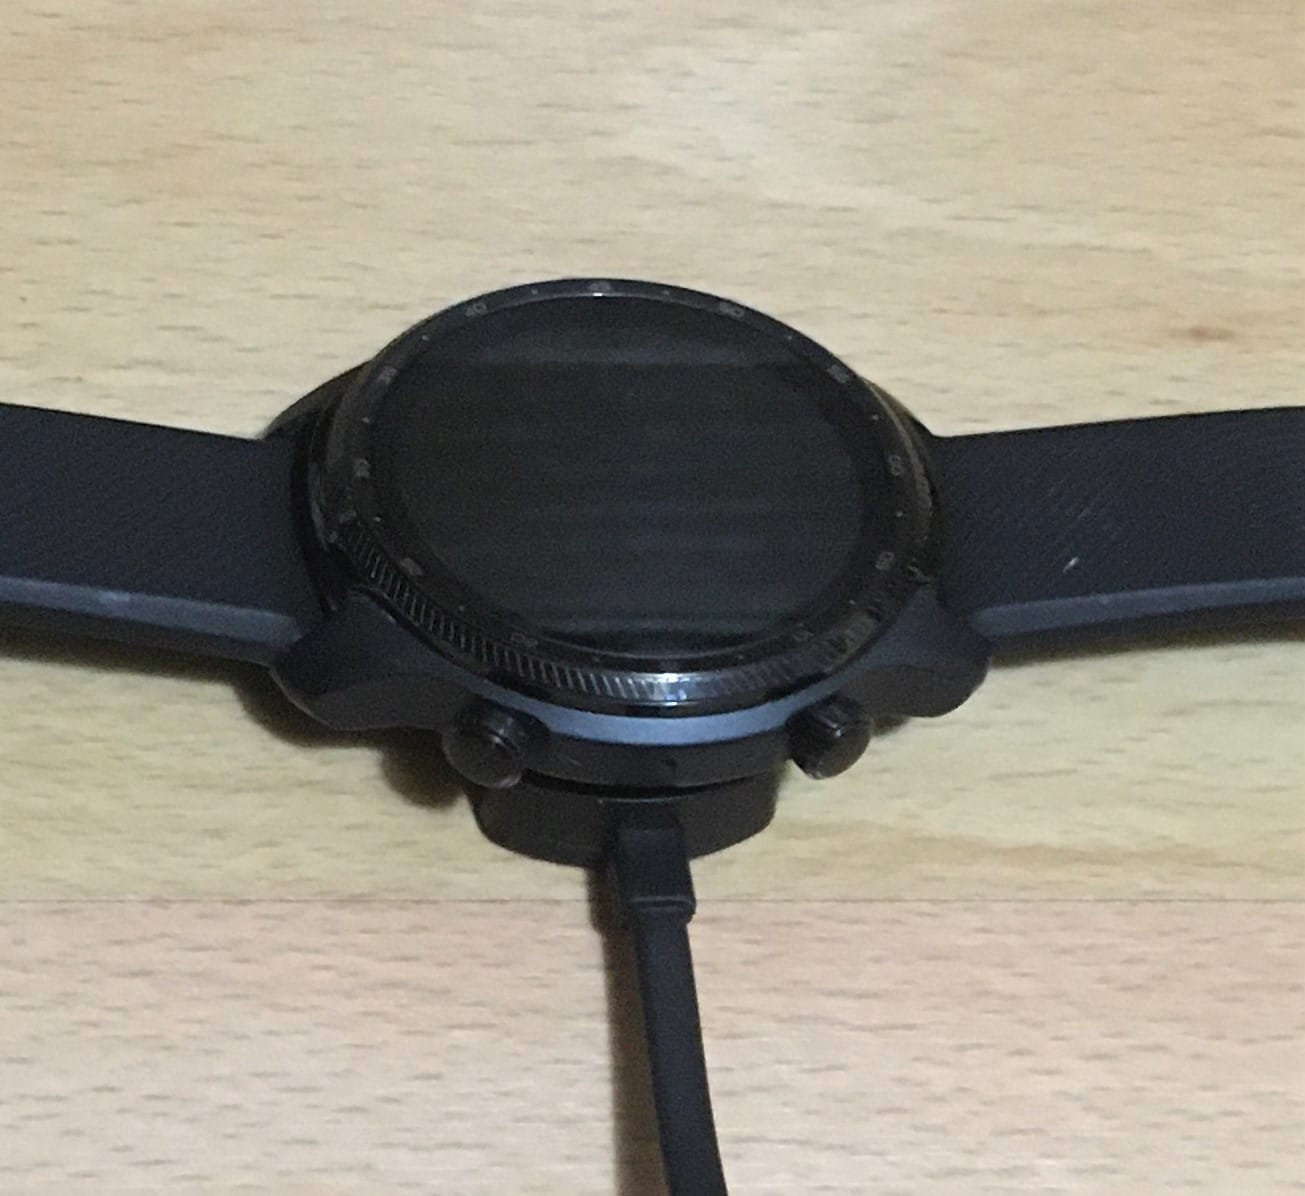 TICWATCH PRO recharge